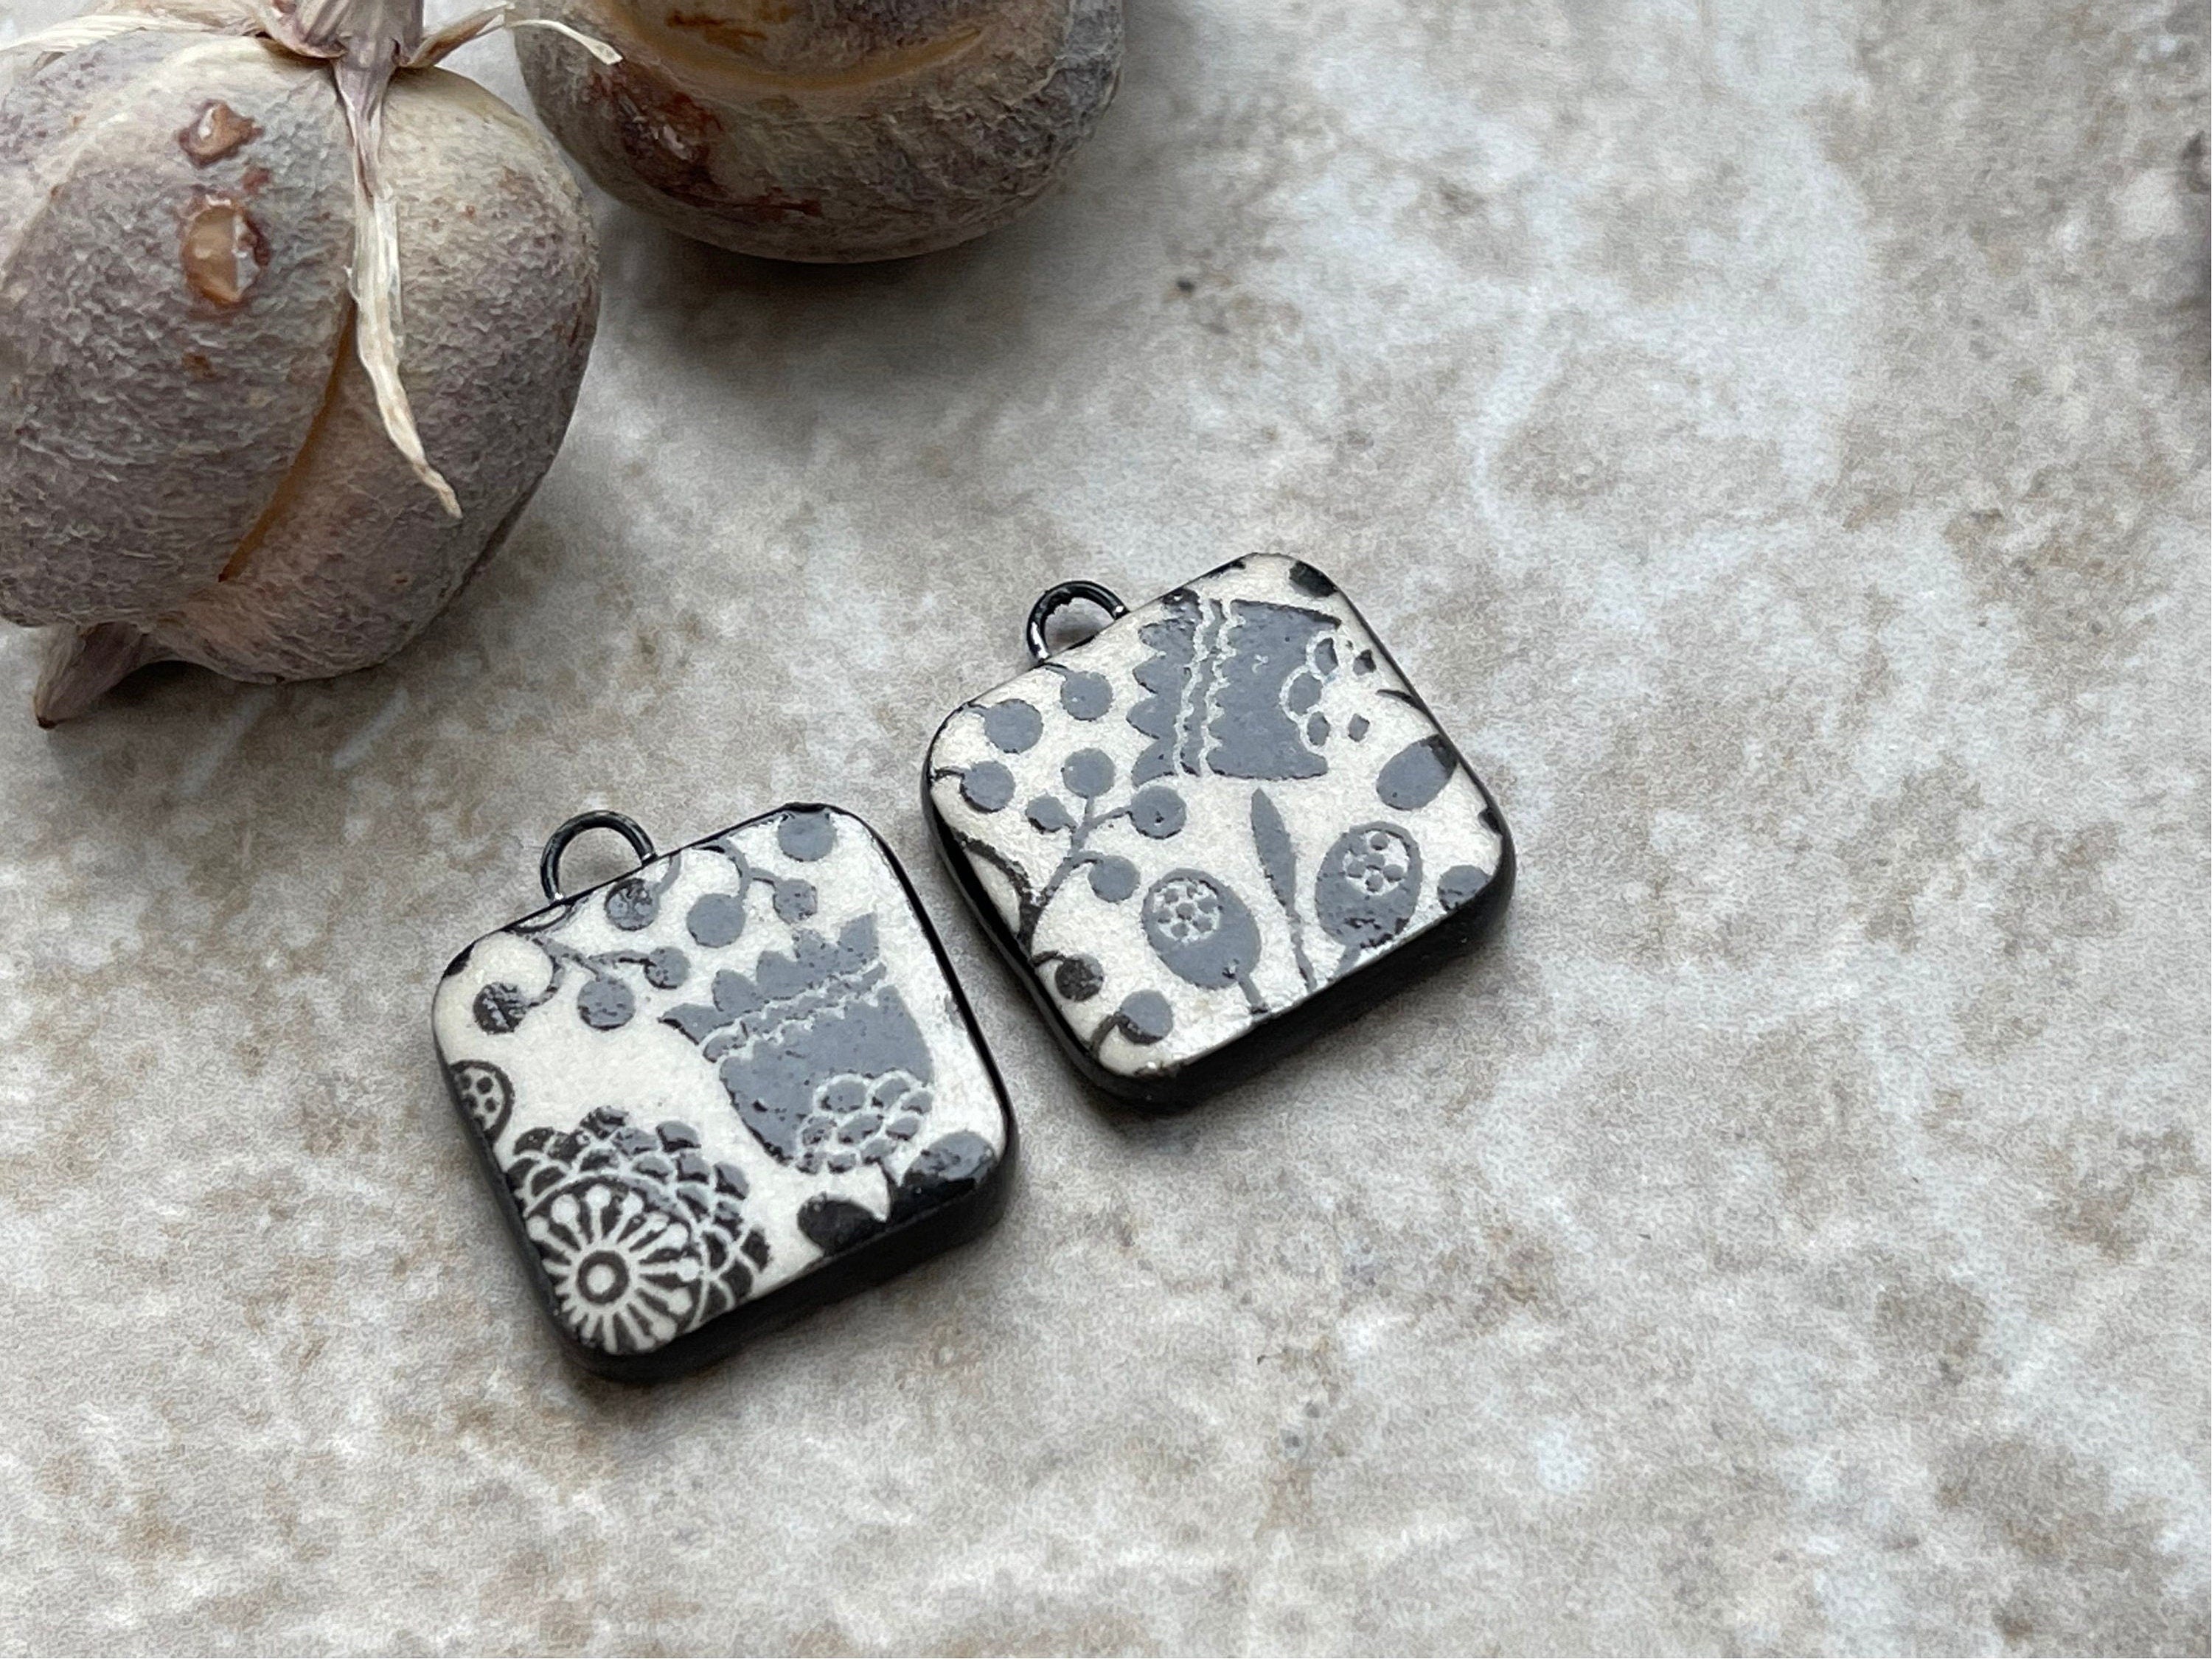 Tulip Beads, Black and White Square, Black Earring Bead Pair